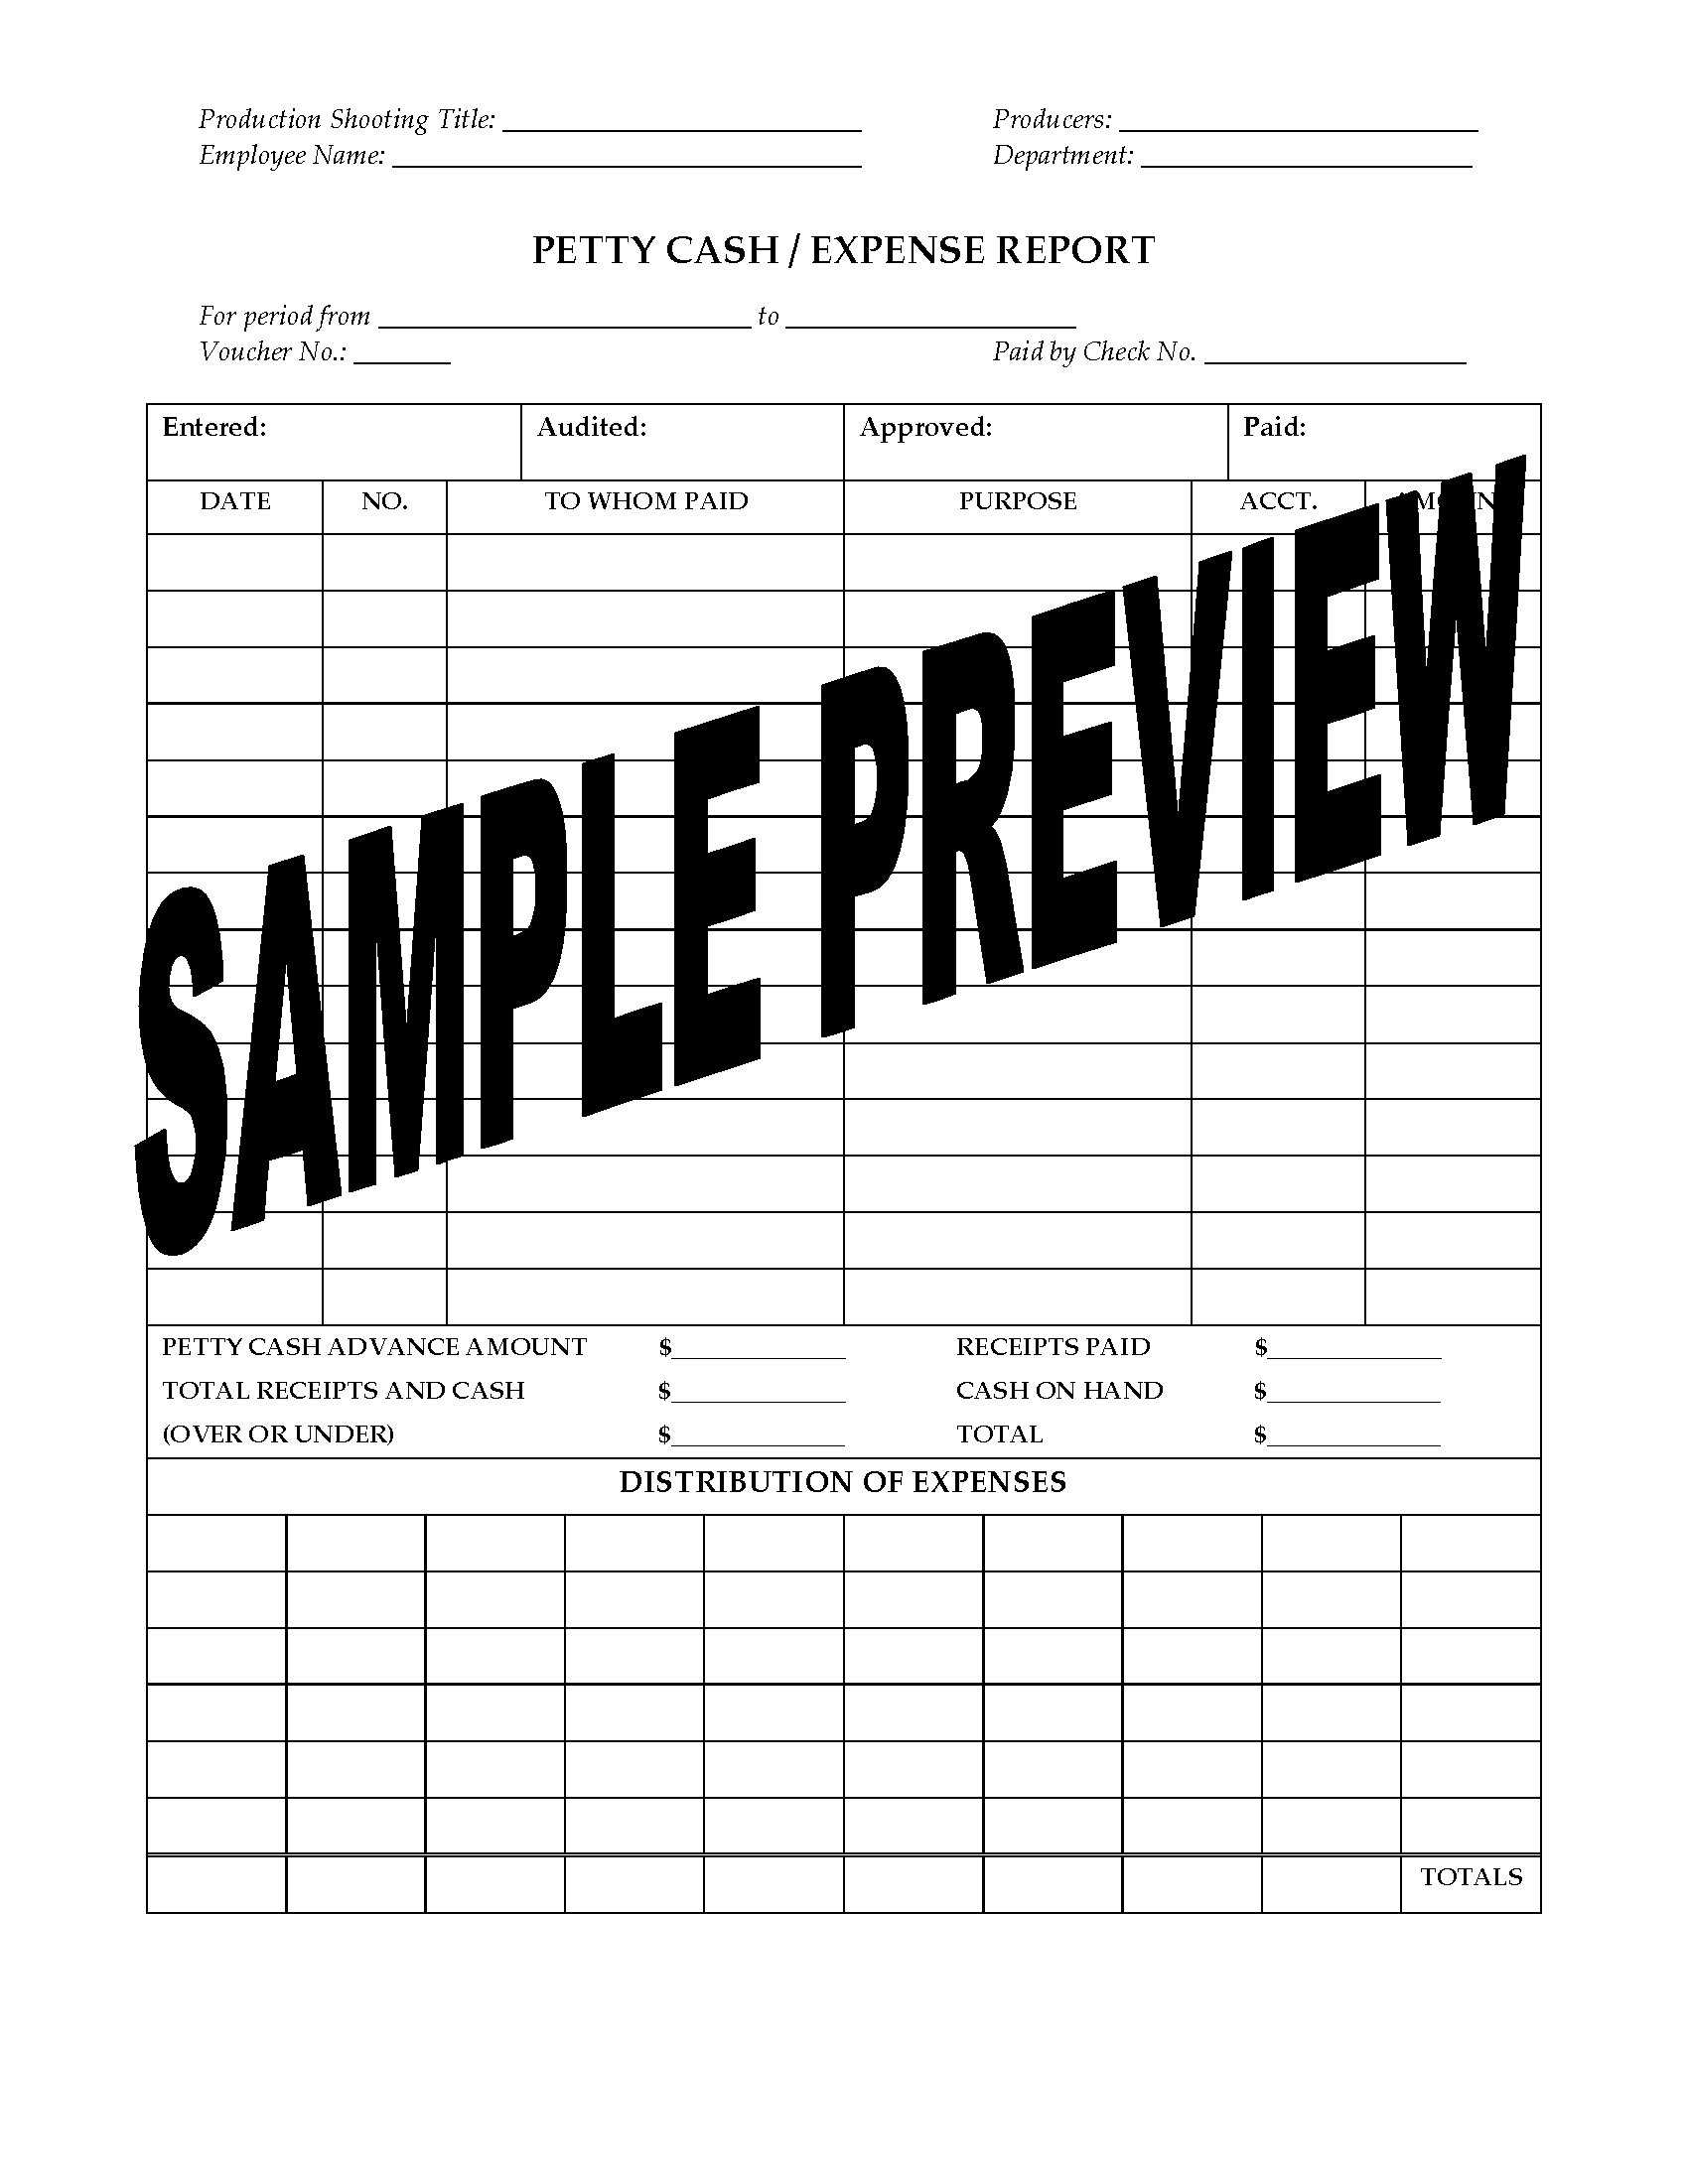 Petty Cash Expense Report For Film Or Tv Production Within Petty Cash Expense Report Template